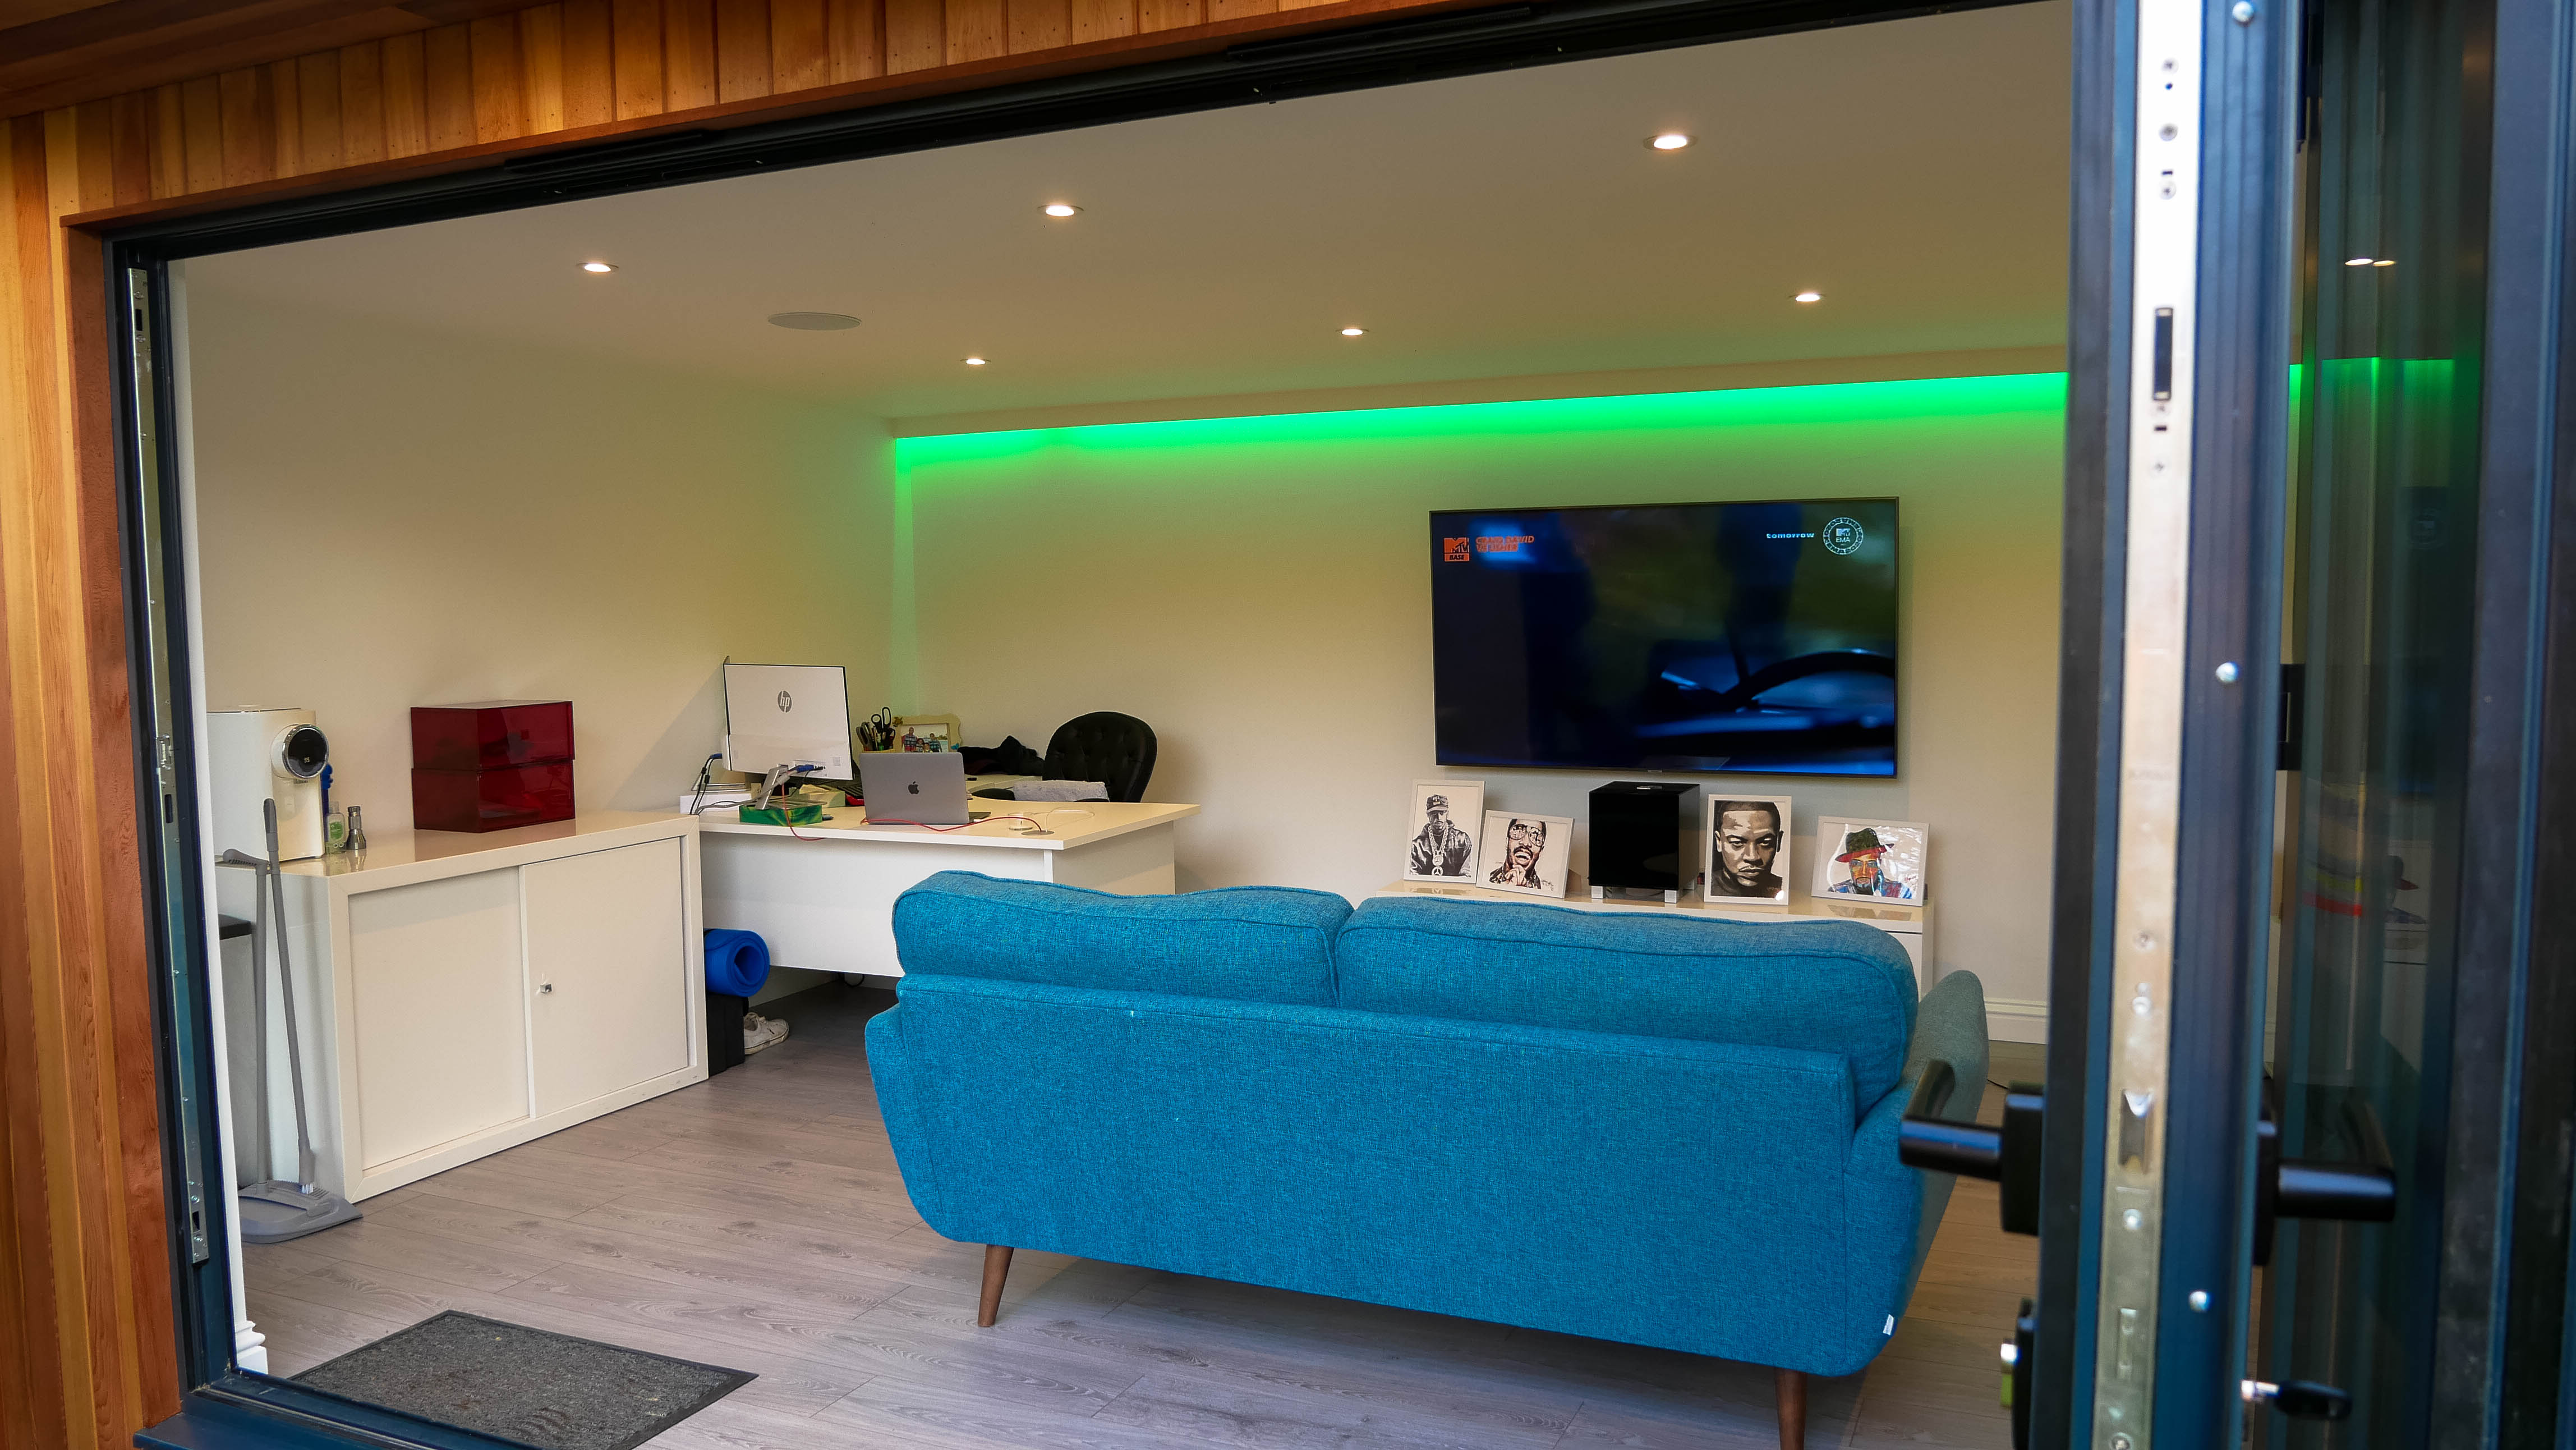 man cave garden studio with speakers in ceiling and LED strip downlighter in crawley sussex